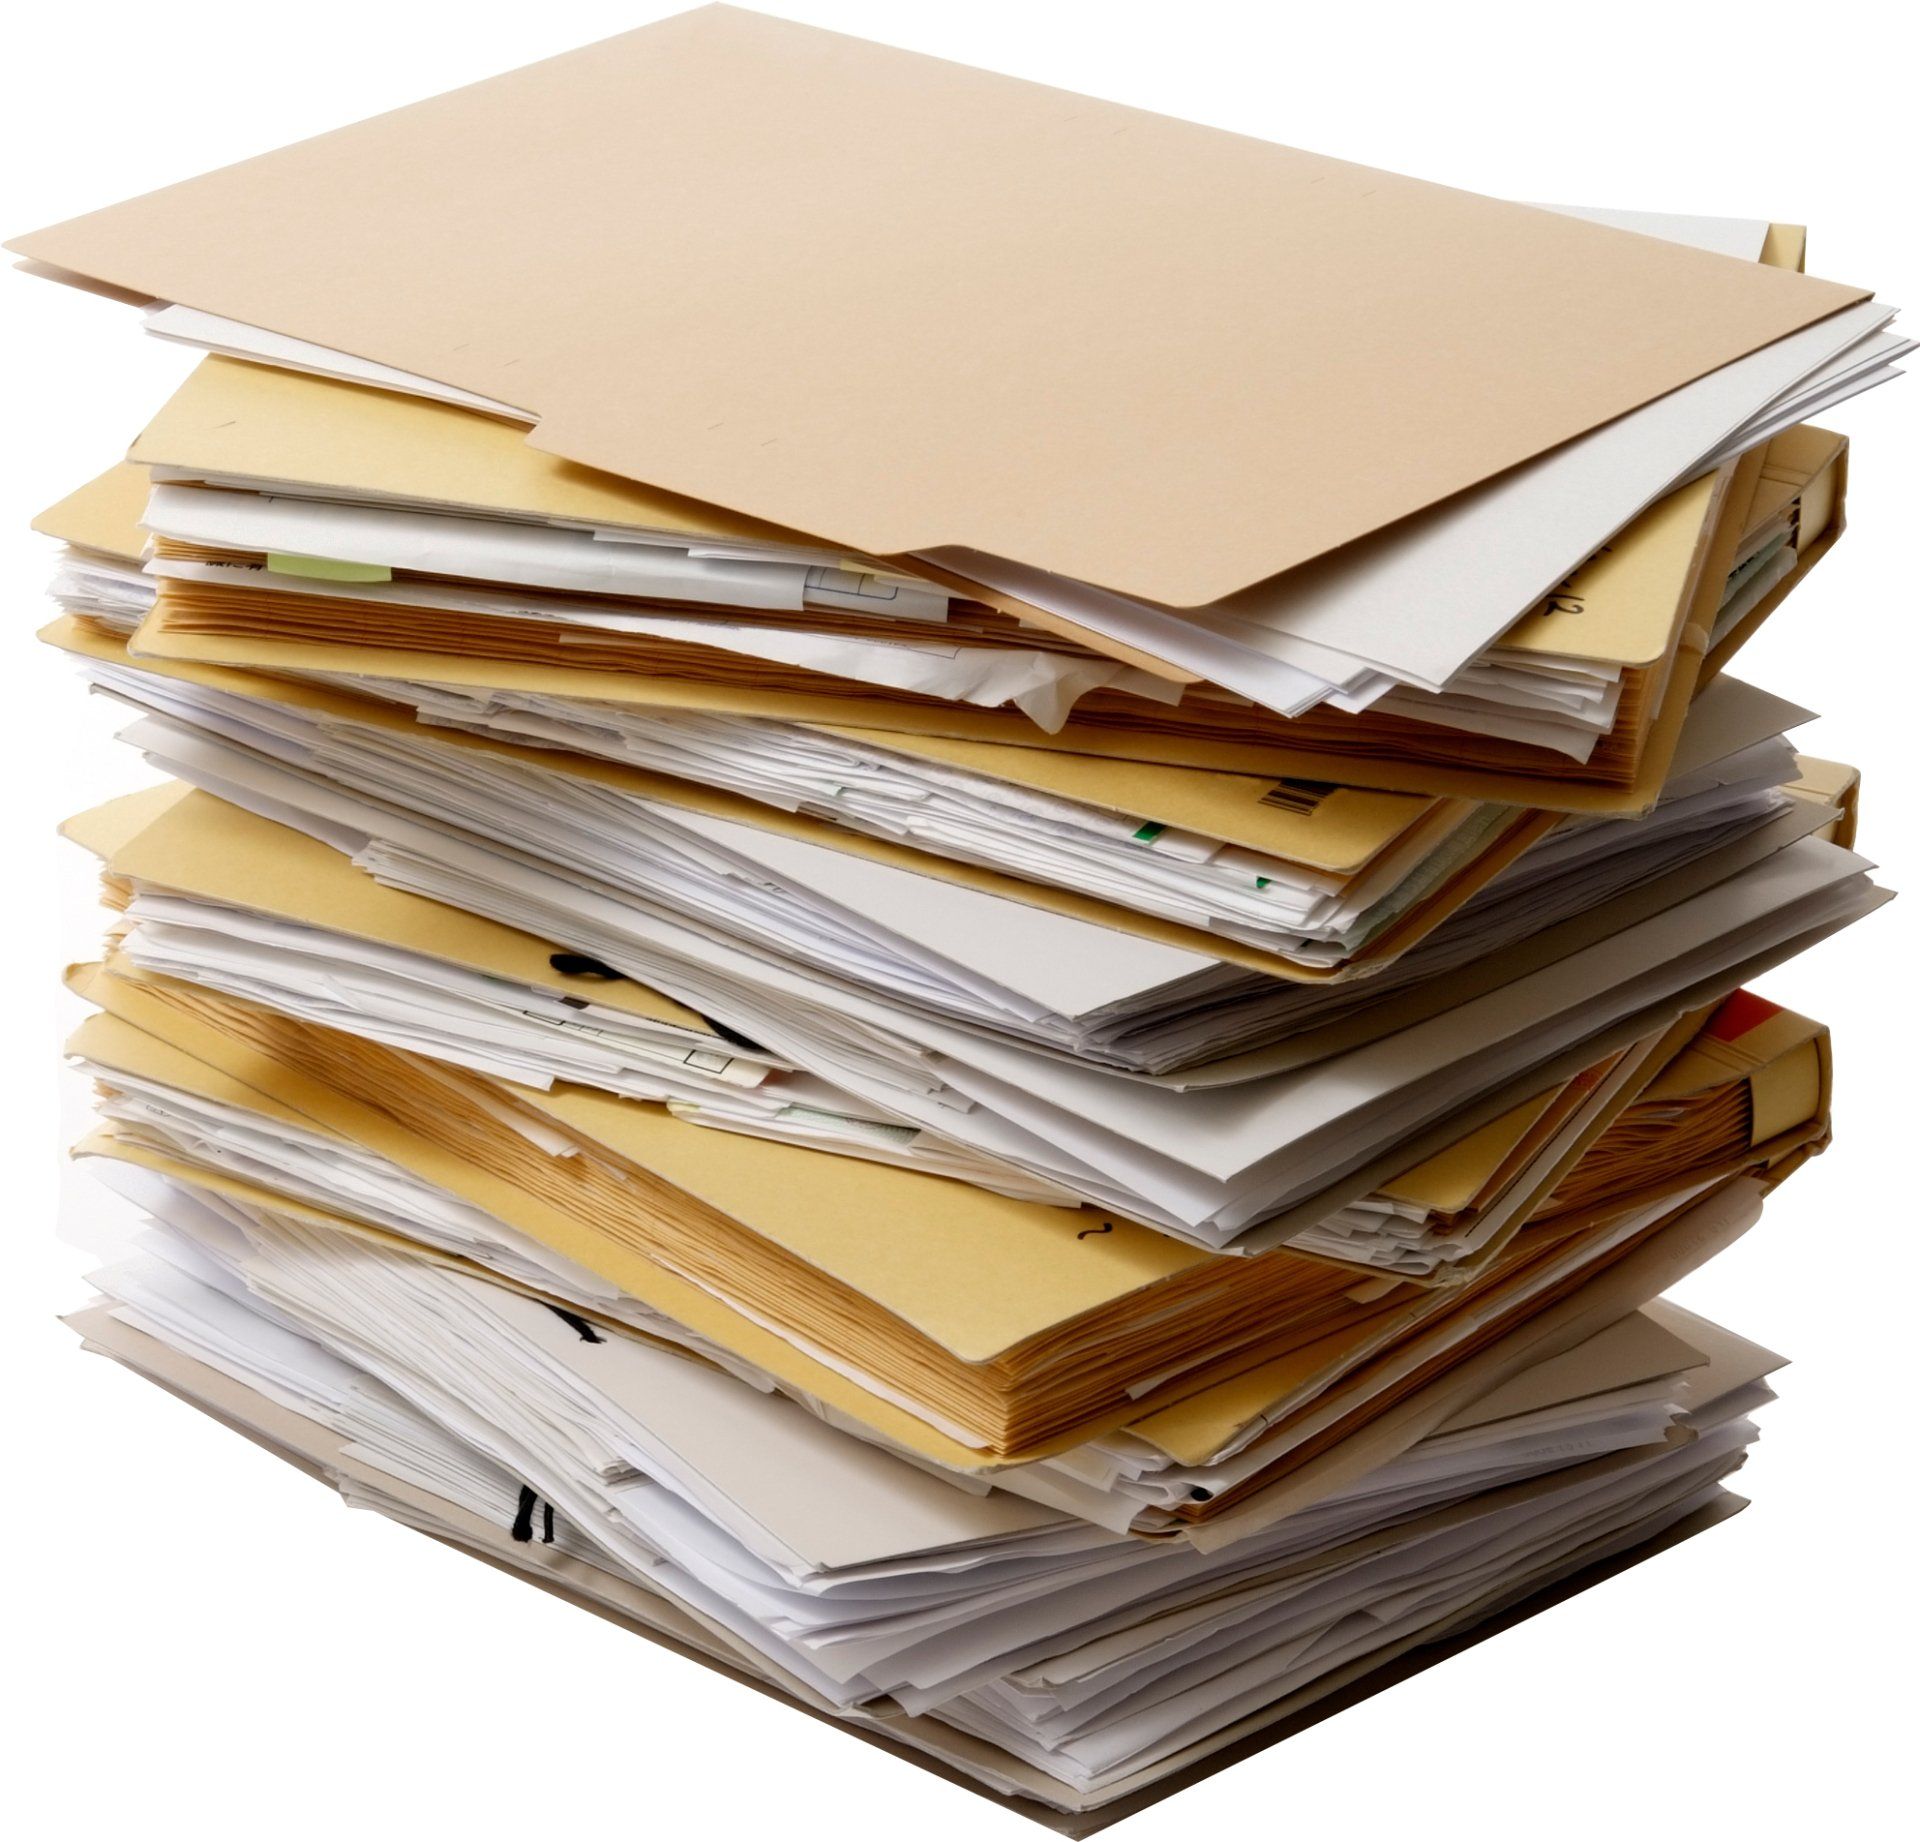 Pile of Shredded Medical Documents | Chicago, IL | Document Destruction Company, Inc.